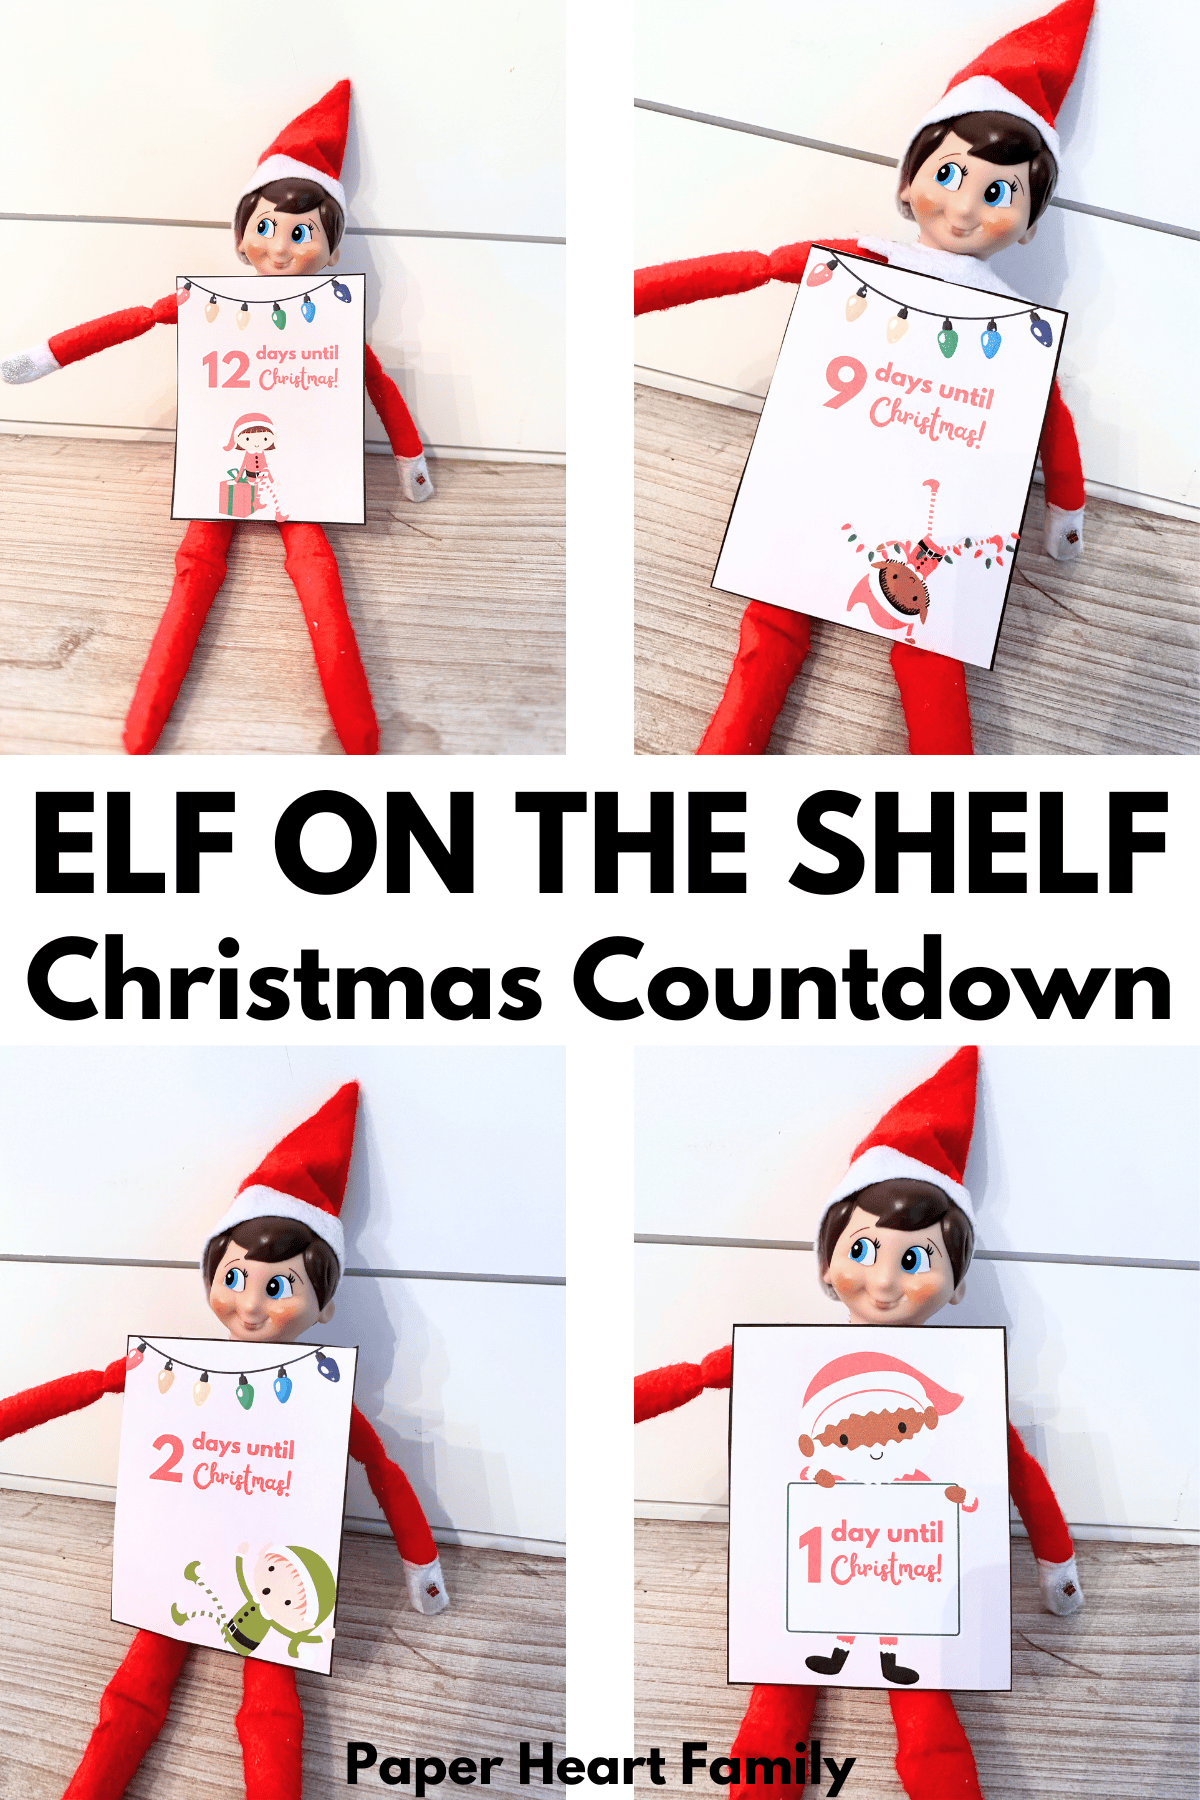 Notes that say "___ days until Christmas" for the Elf on the Shelf to hold